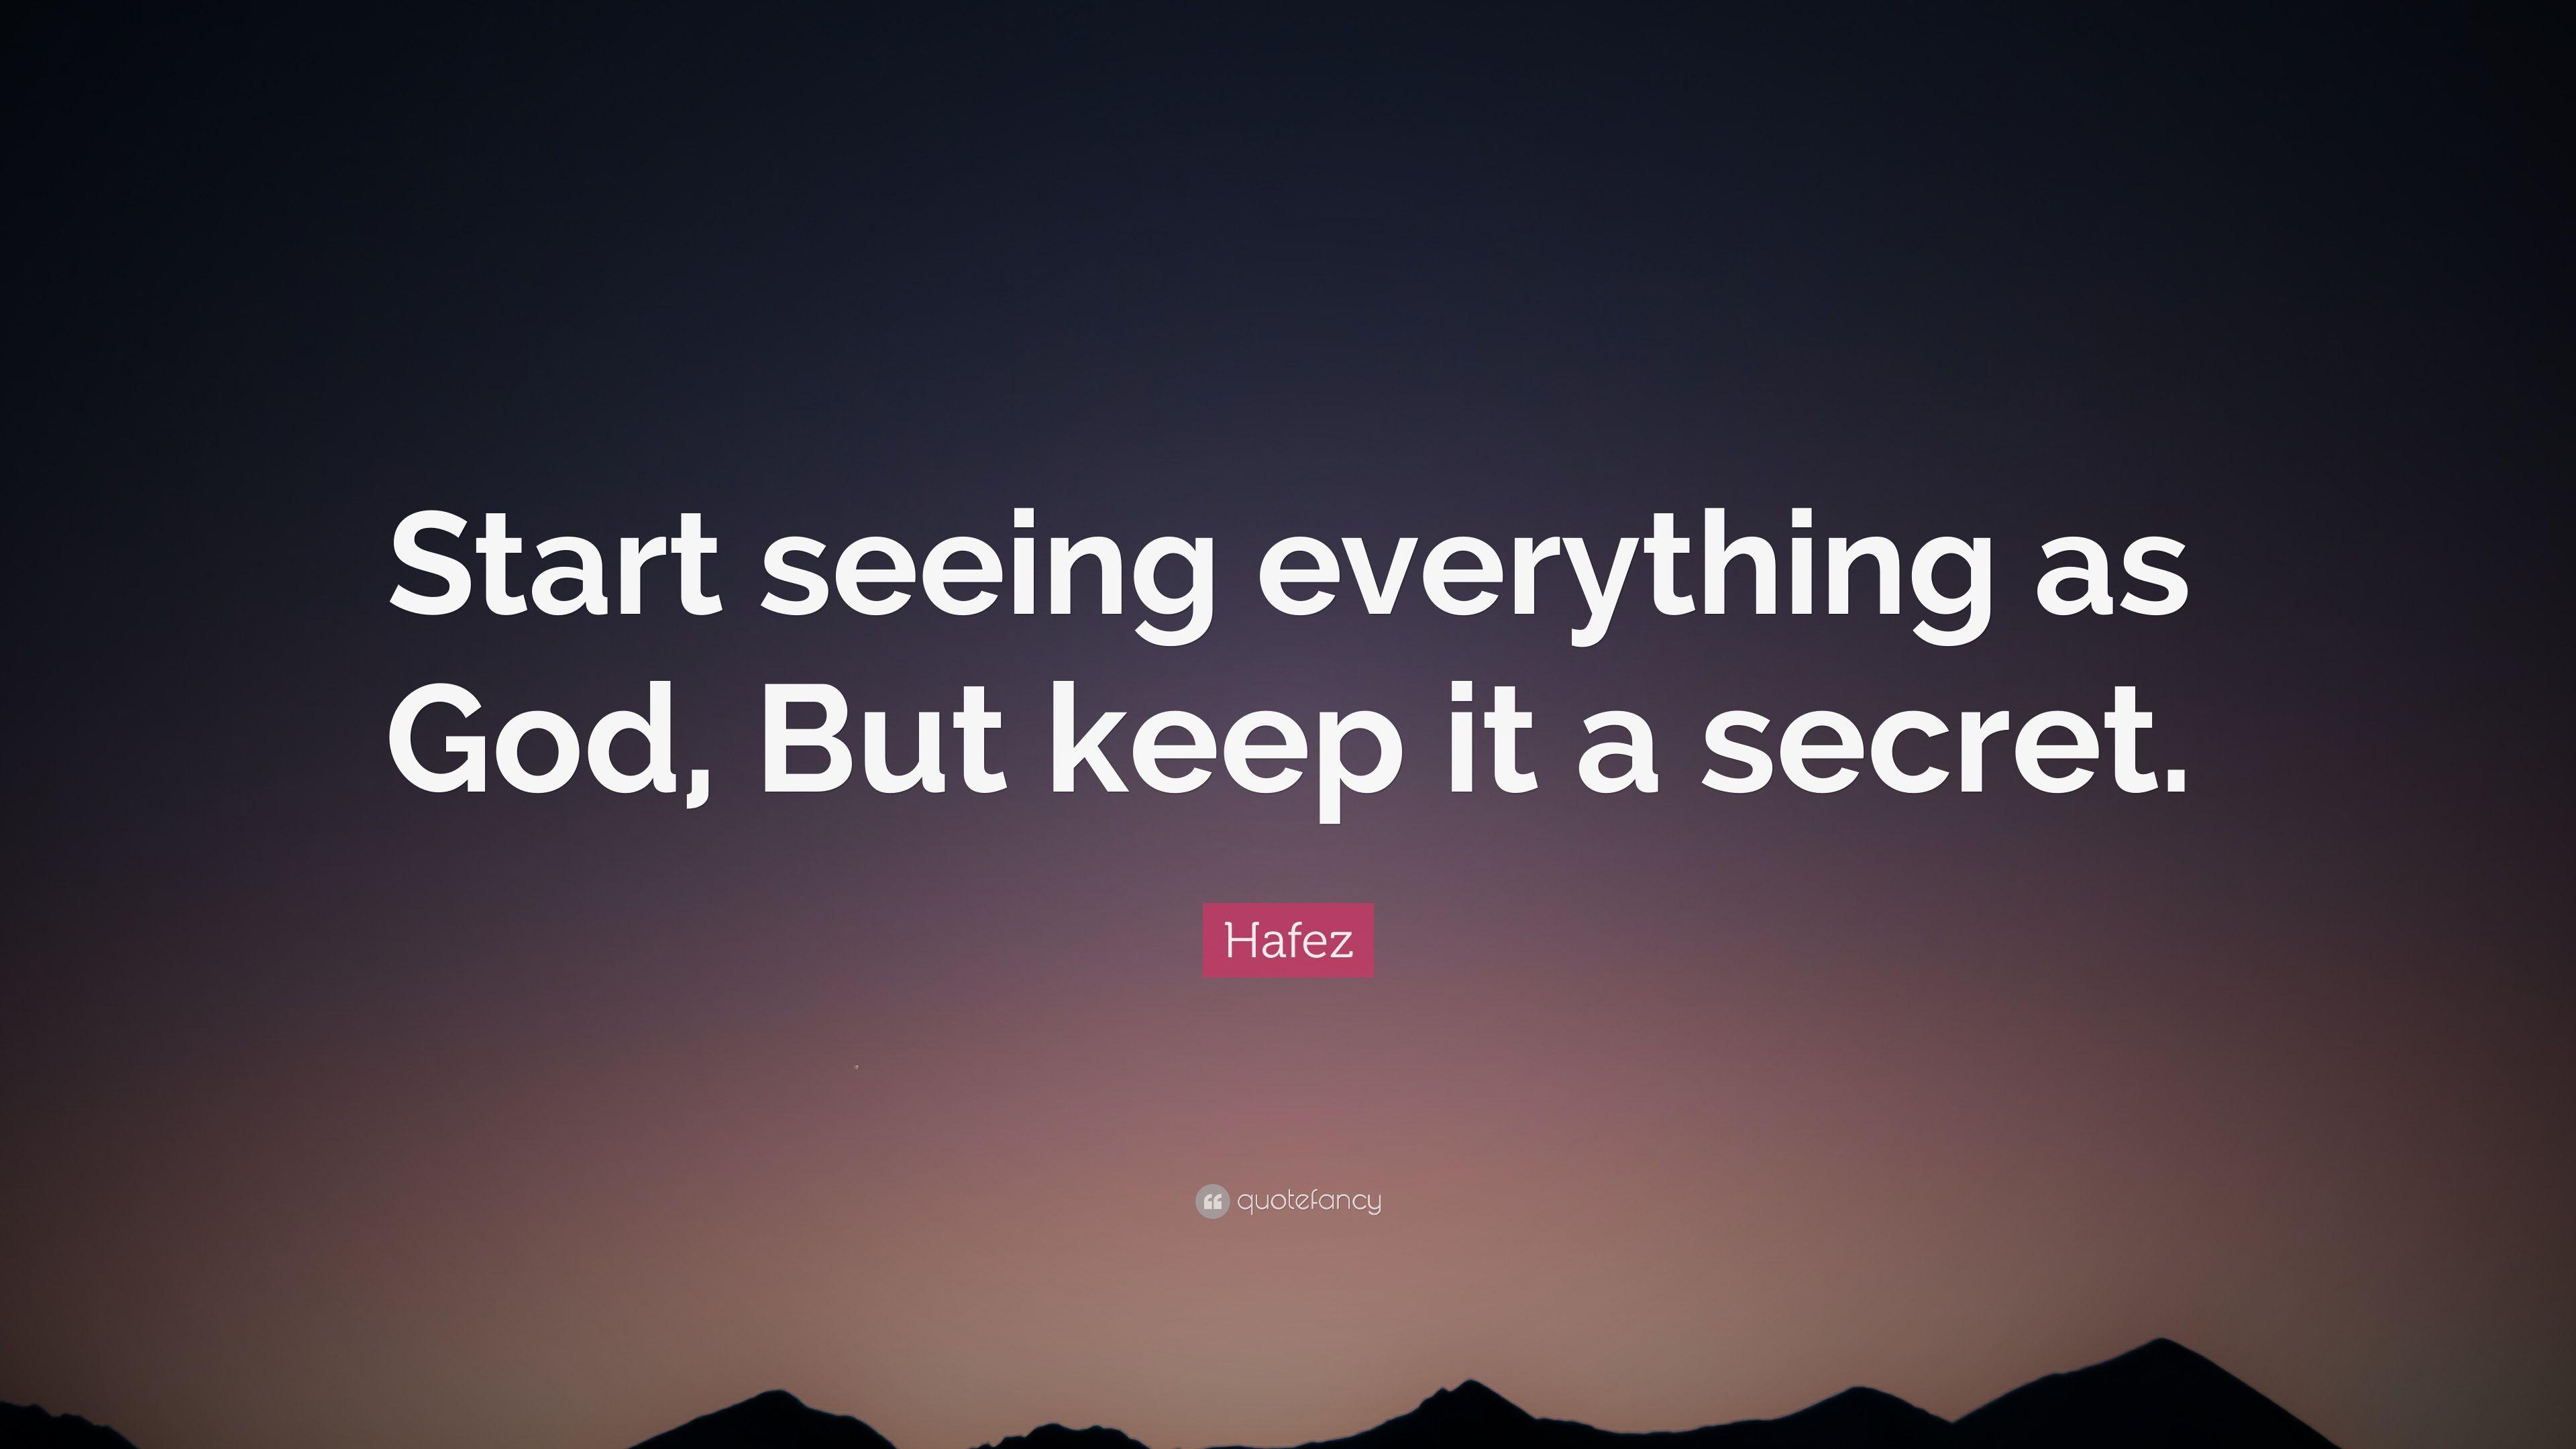 Hafez Quote: “Start seeing everything as God, But keep it a secret